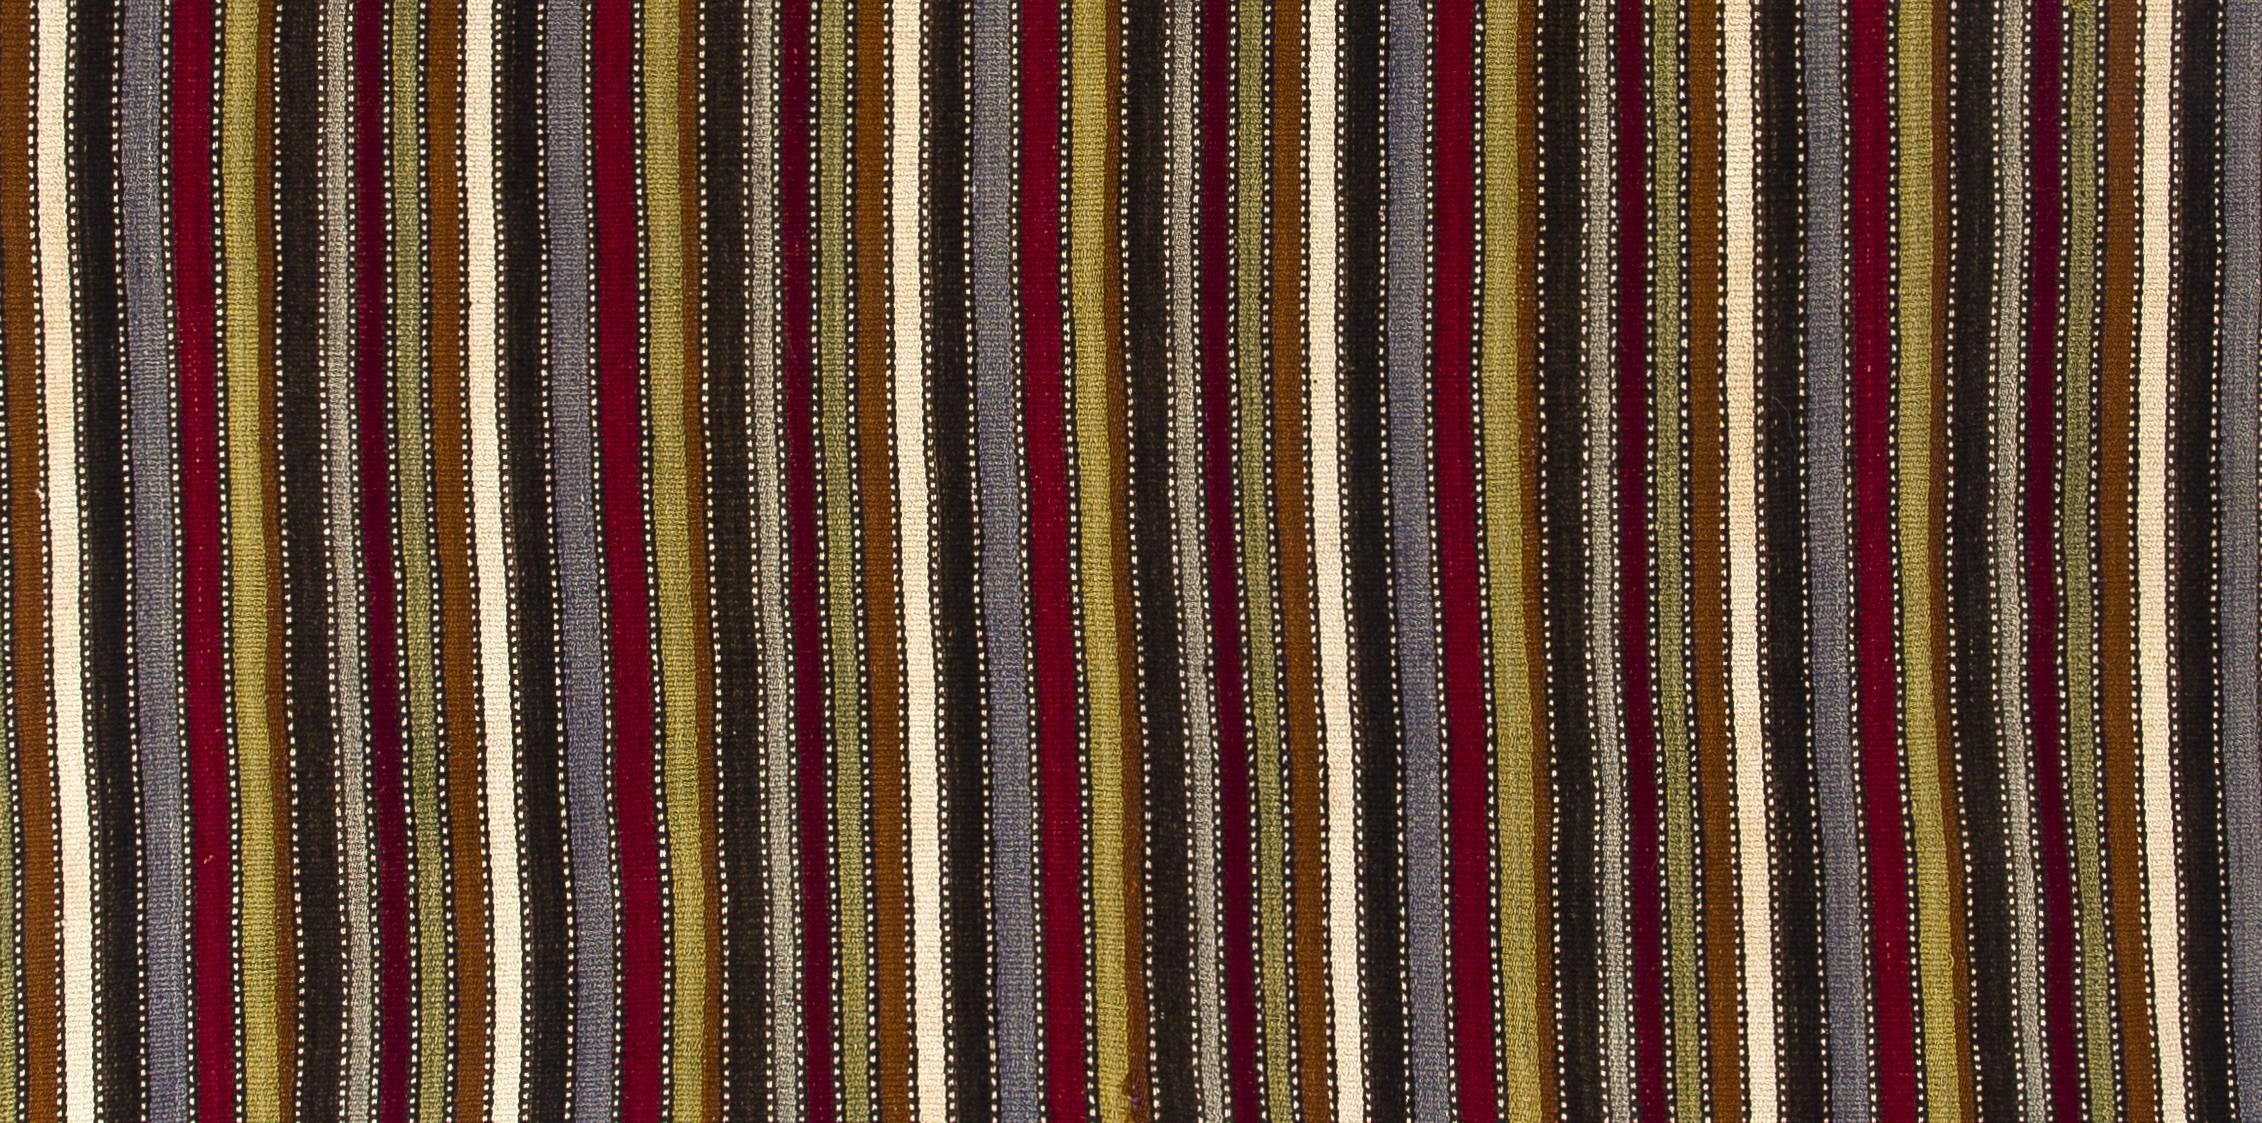 This authentic handwoven flat-weave (Kilim) from Central Turkey was made by Nomads to be used as a floor covering in their tents or summer houses around mid-20th century. Measures: 5.6 x 6 ft.

These vintage utilitarian Kilims were made to use for